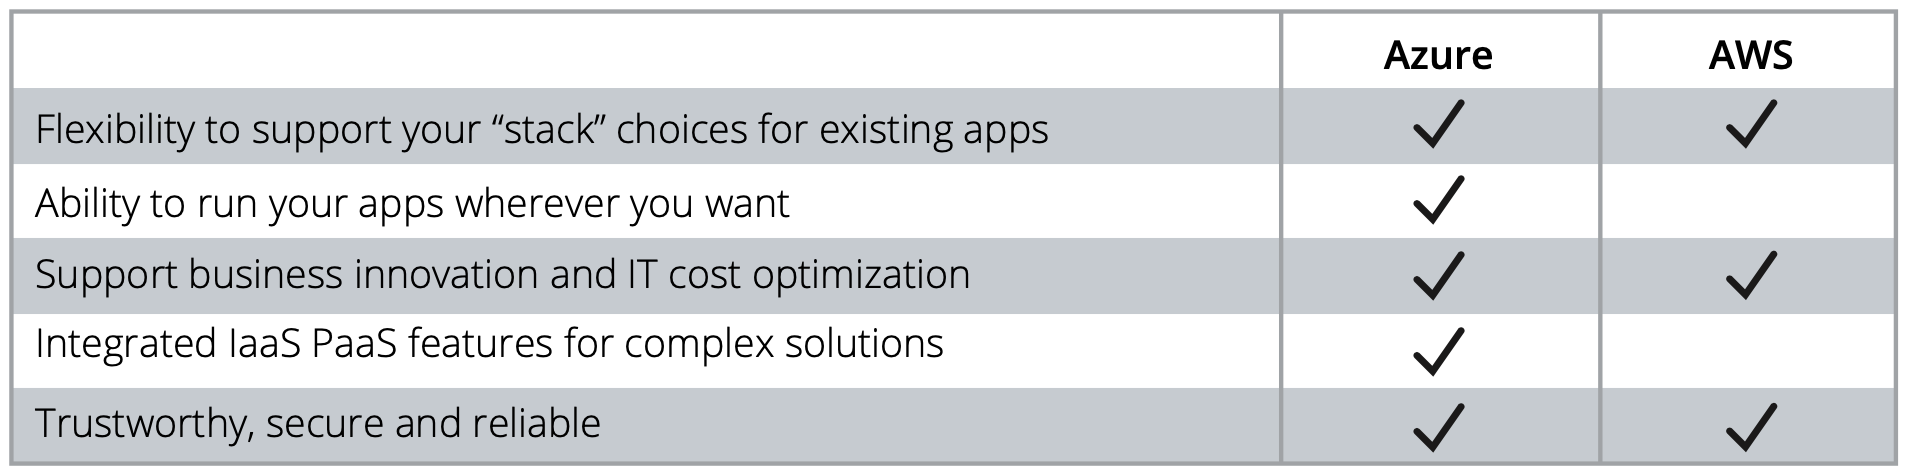 dos-application-development The Do's and Don'ts of Application Development on Azure